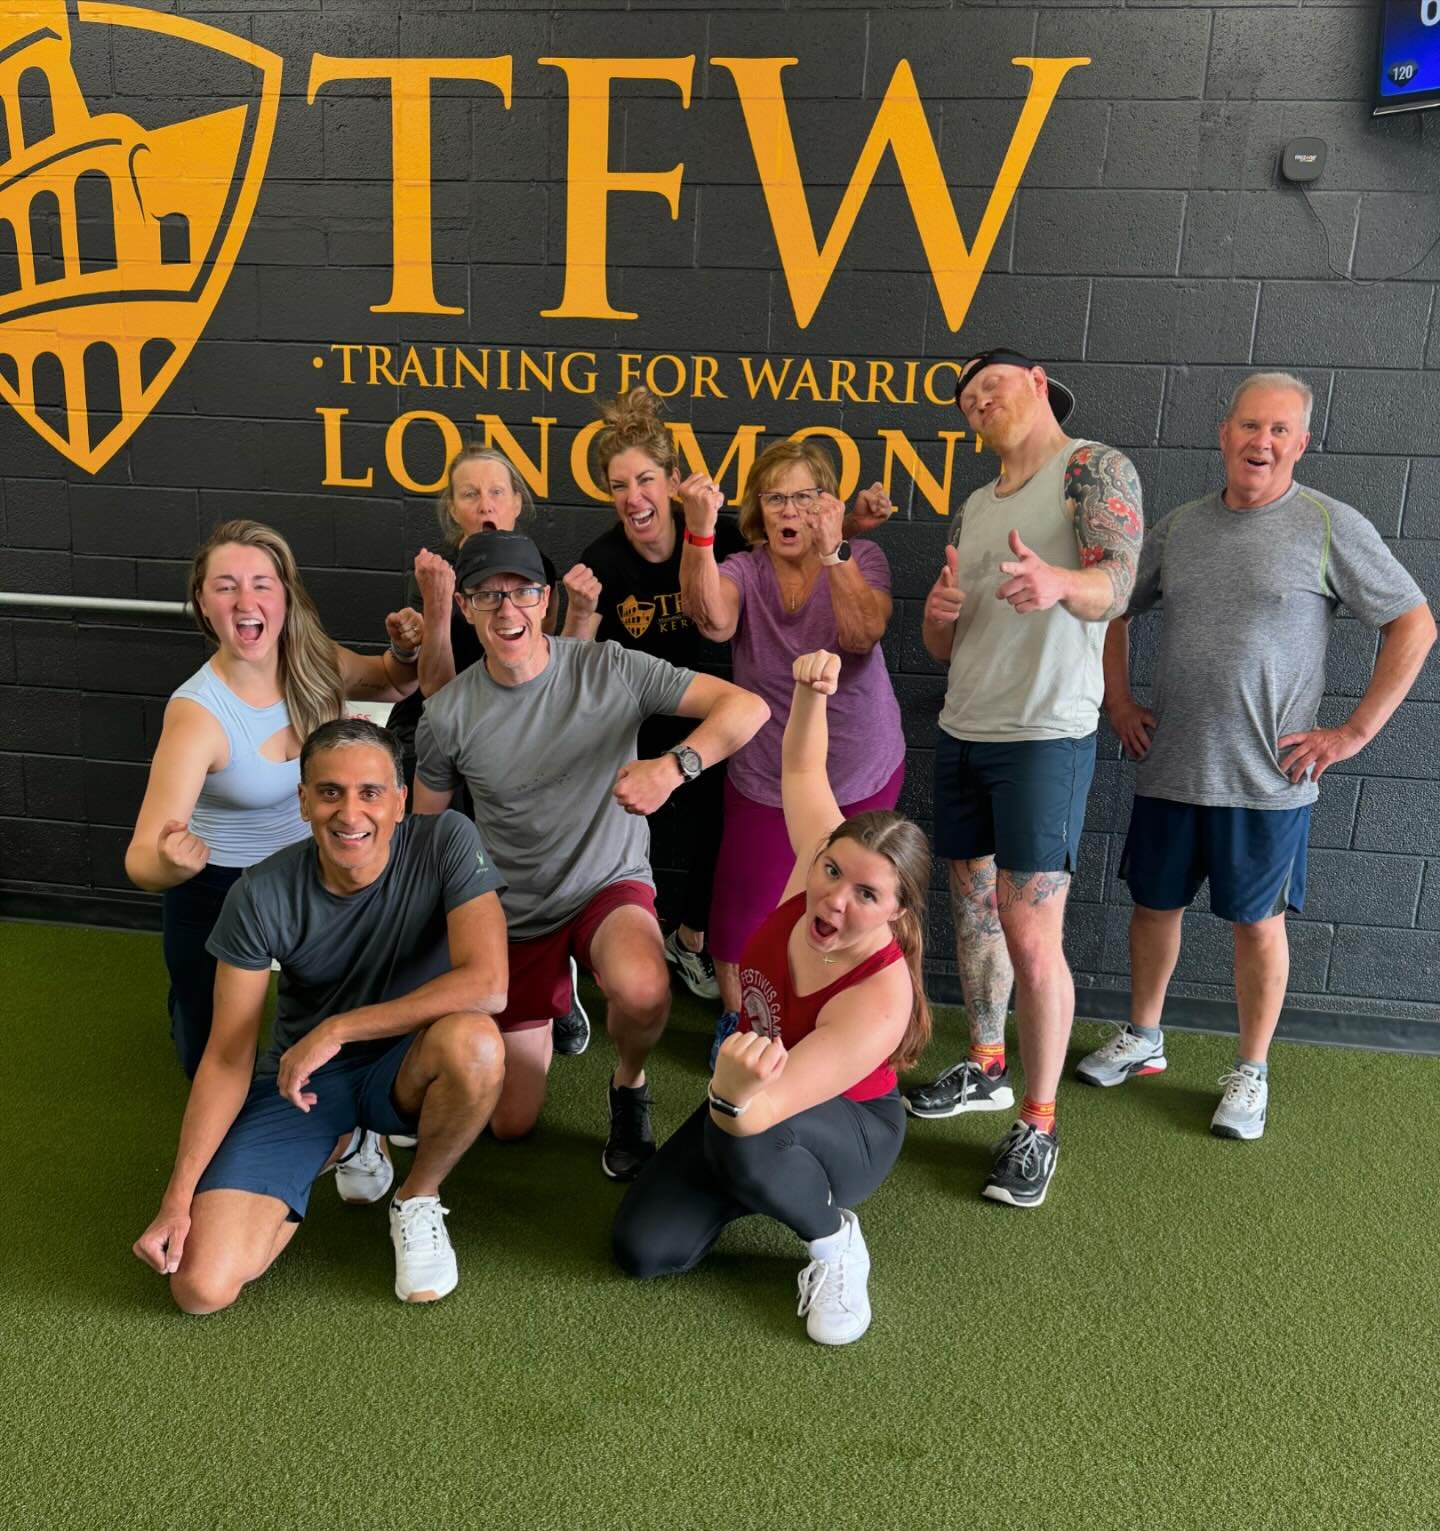 🙌🏼 Lose Fat ~ Build Muscle ~ Feel Good 🙌🏼

Havent worked out in awhile? 
Not sure where to start? 
Afraid you won&rsquo;t be able to &lsquo;keep up&rsquo;? 

Put your fears aside to try a free trial training session at TFW. We got you covered. 👊